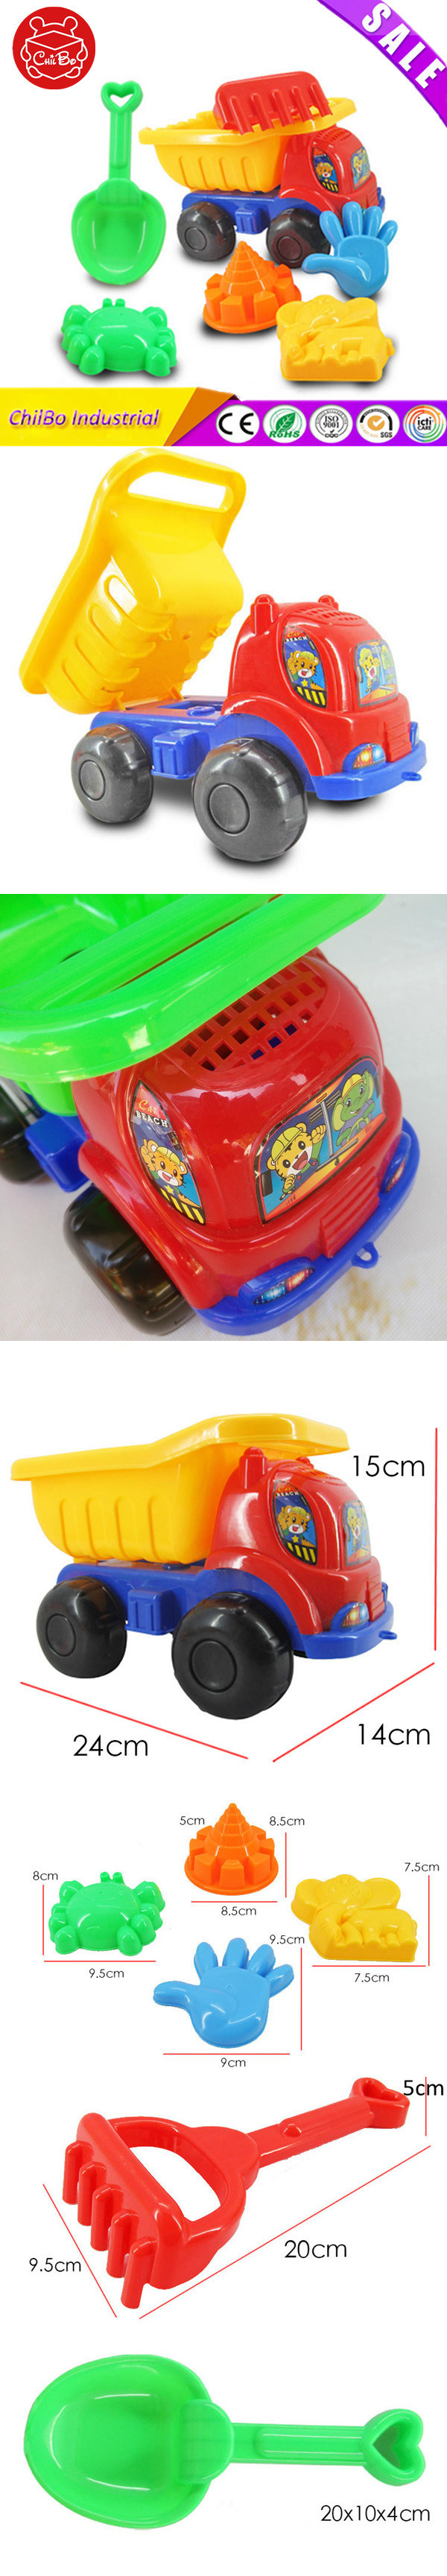 Funny Children Beach Car Toys with Sand-Excavating Tools